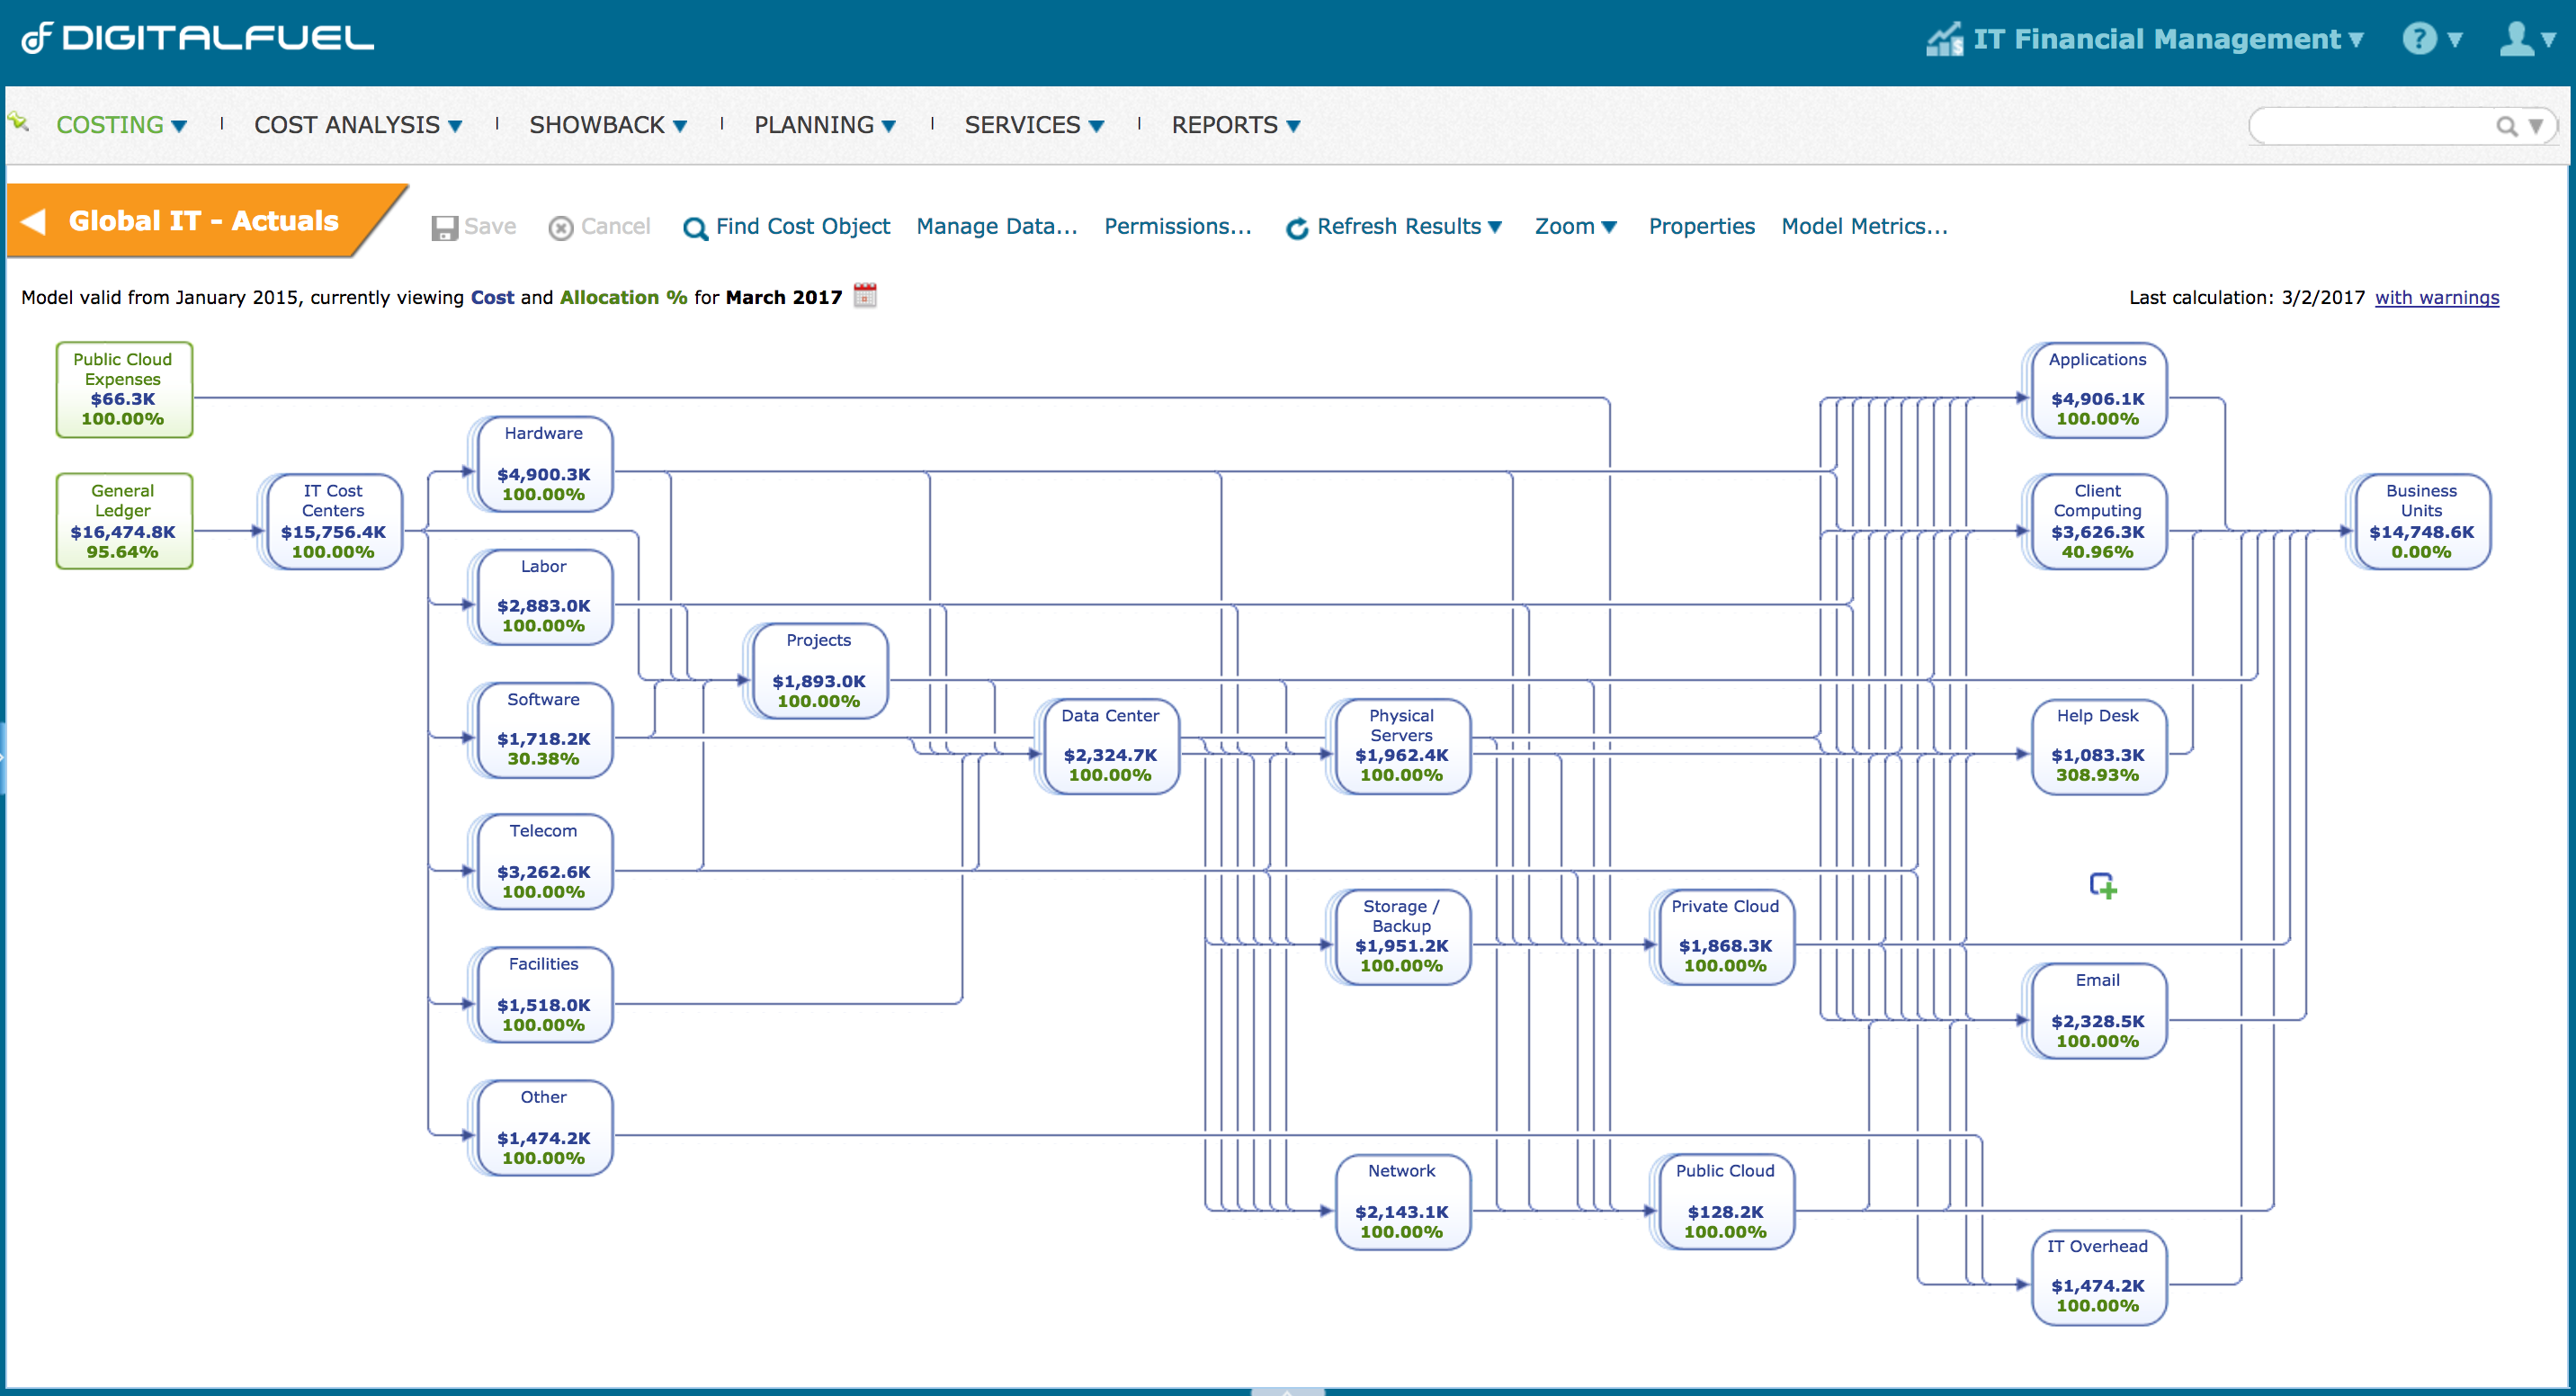 Cost Models can be included in Solution Packs so users can leverage proven modeling practices.